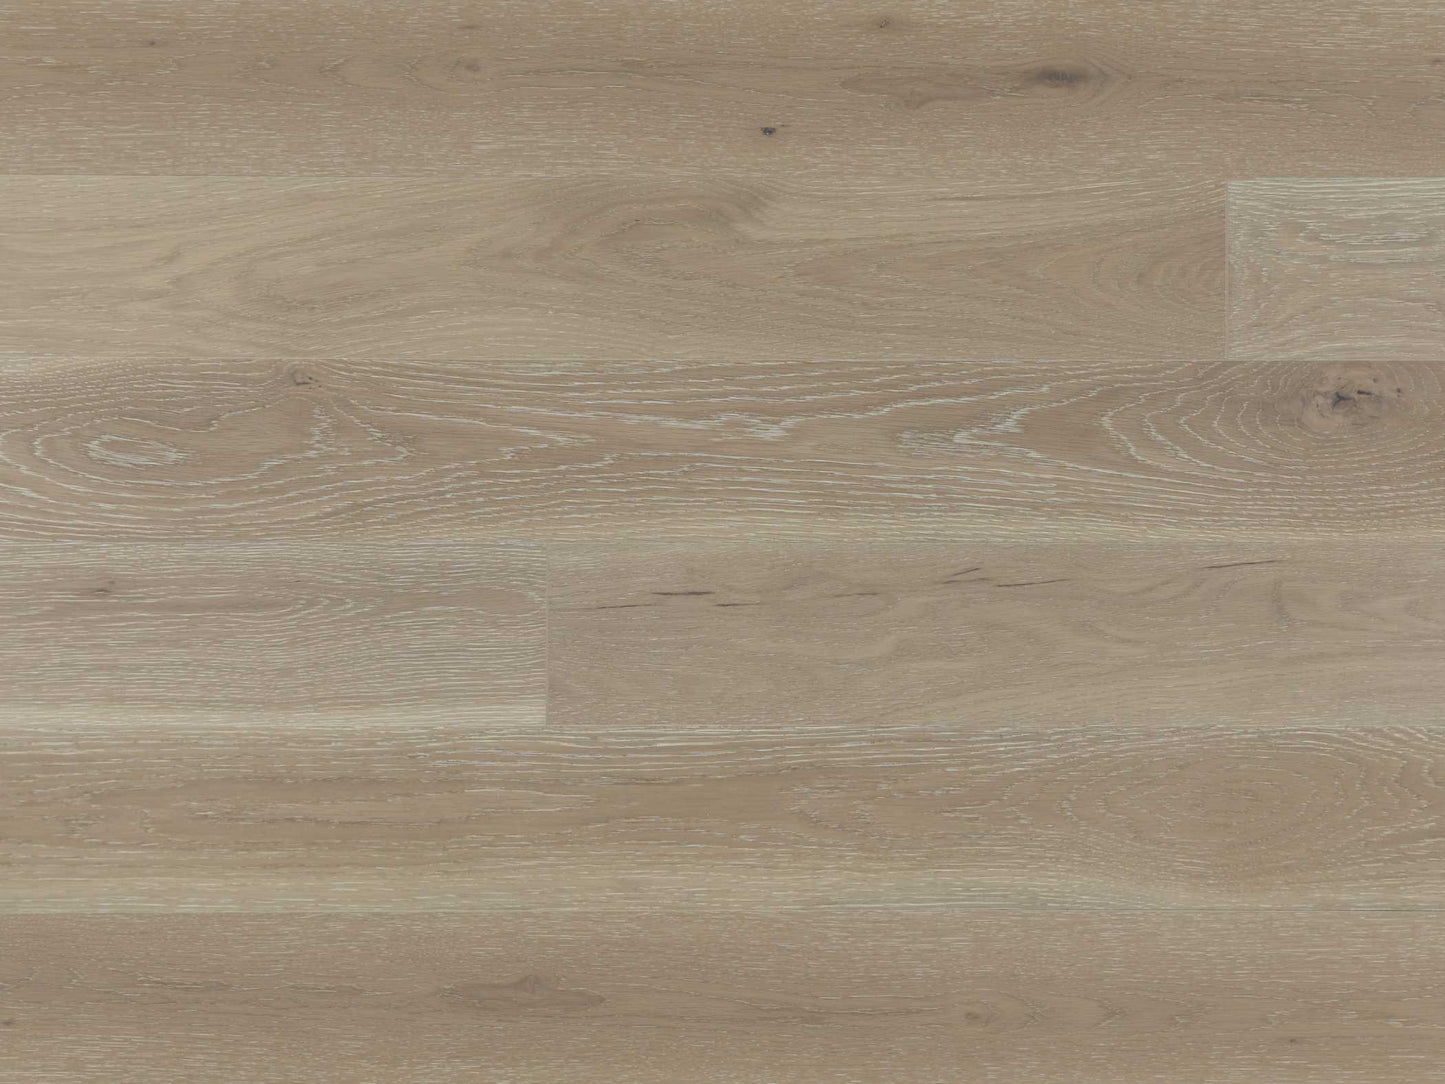 American oak  color driftwood 5 x ¾ x 35 in nail